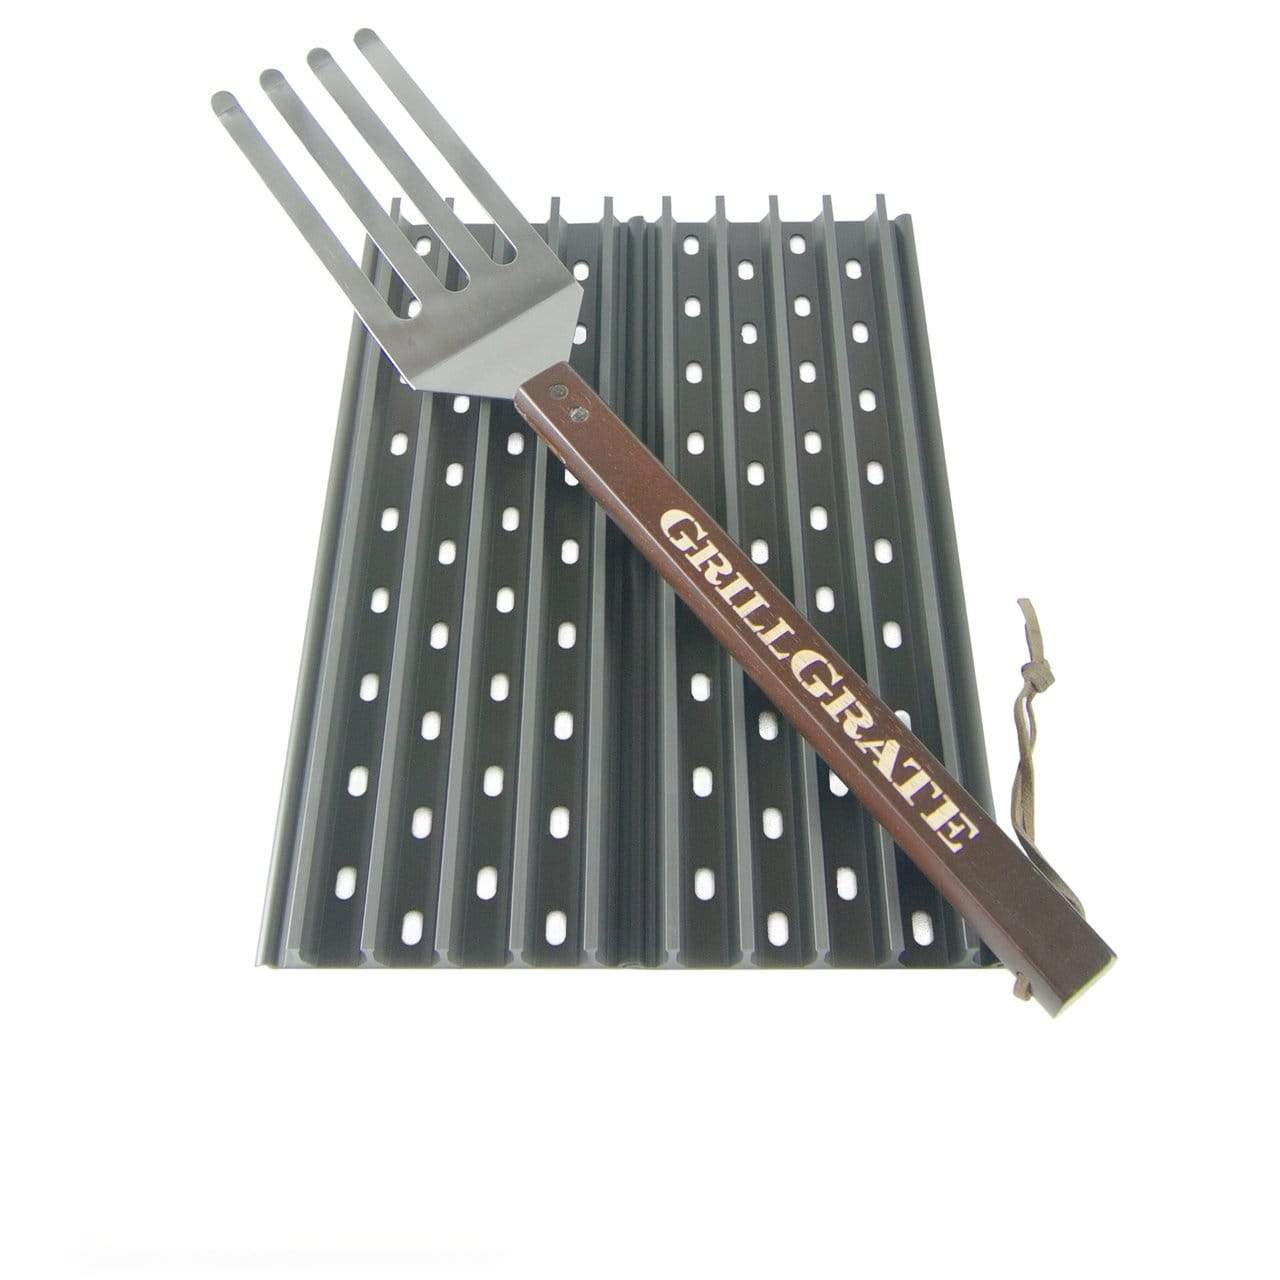 Grill Grate Set of 3 15" Grill Grate Panels (Timberline)